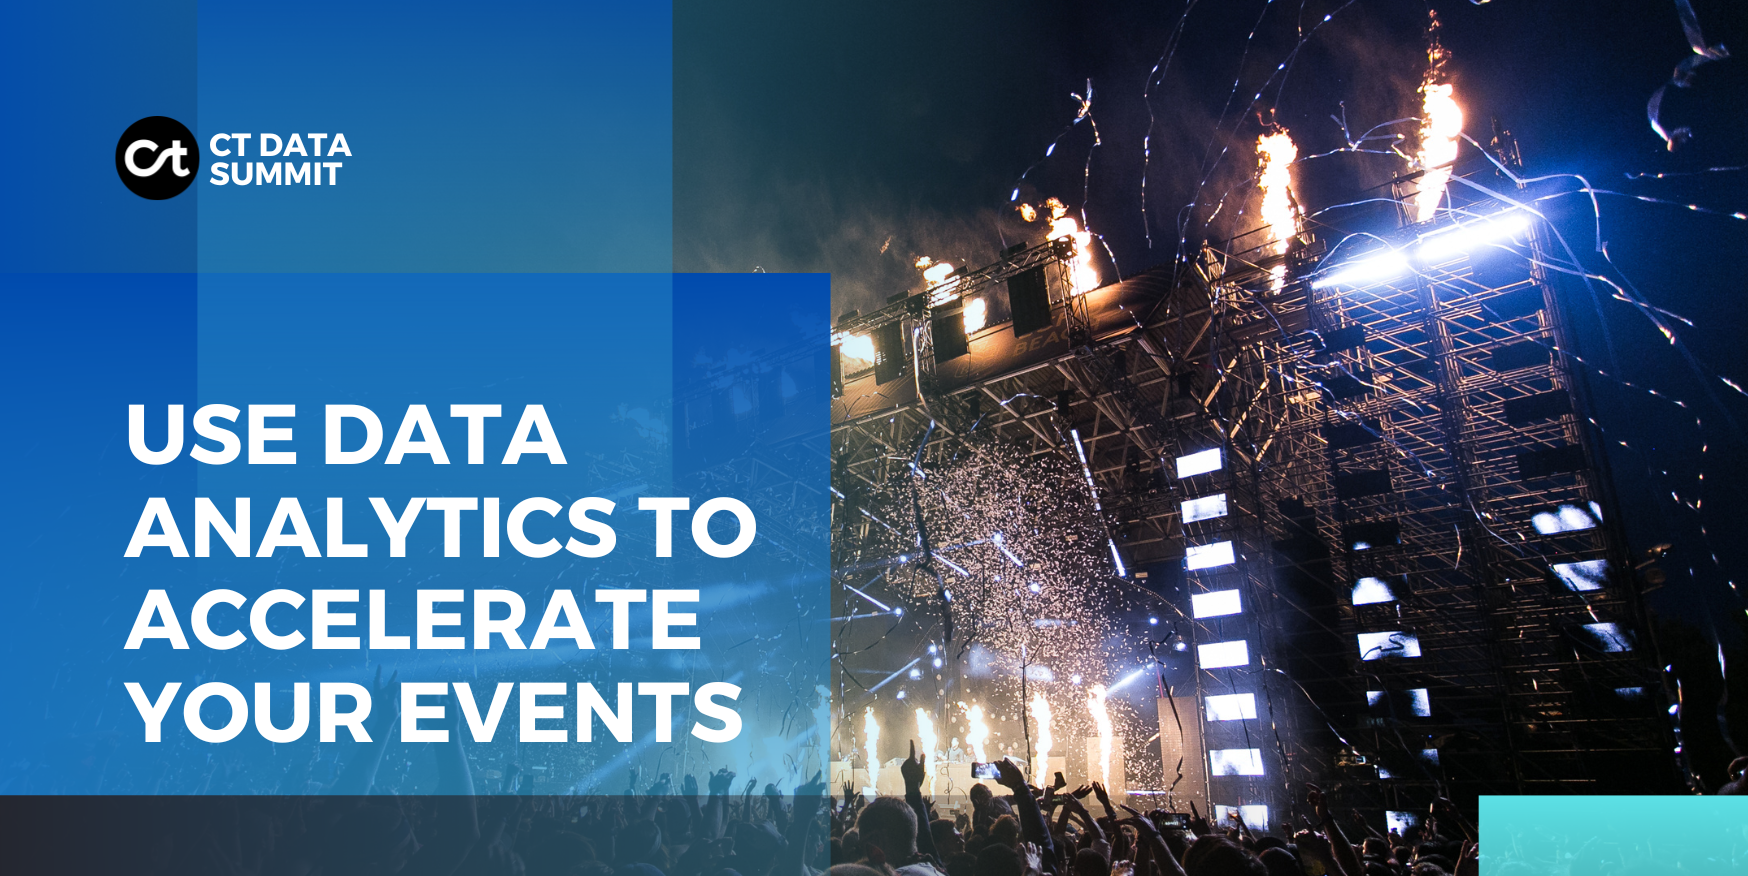 *FULL EBOOK* Accelerate Your Event and Ticket Sales: The Complete Guide